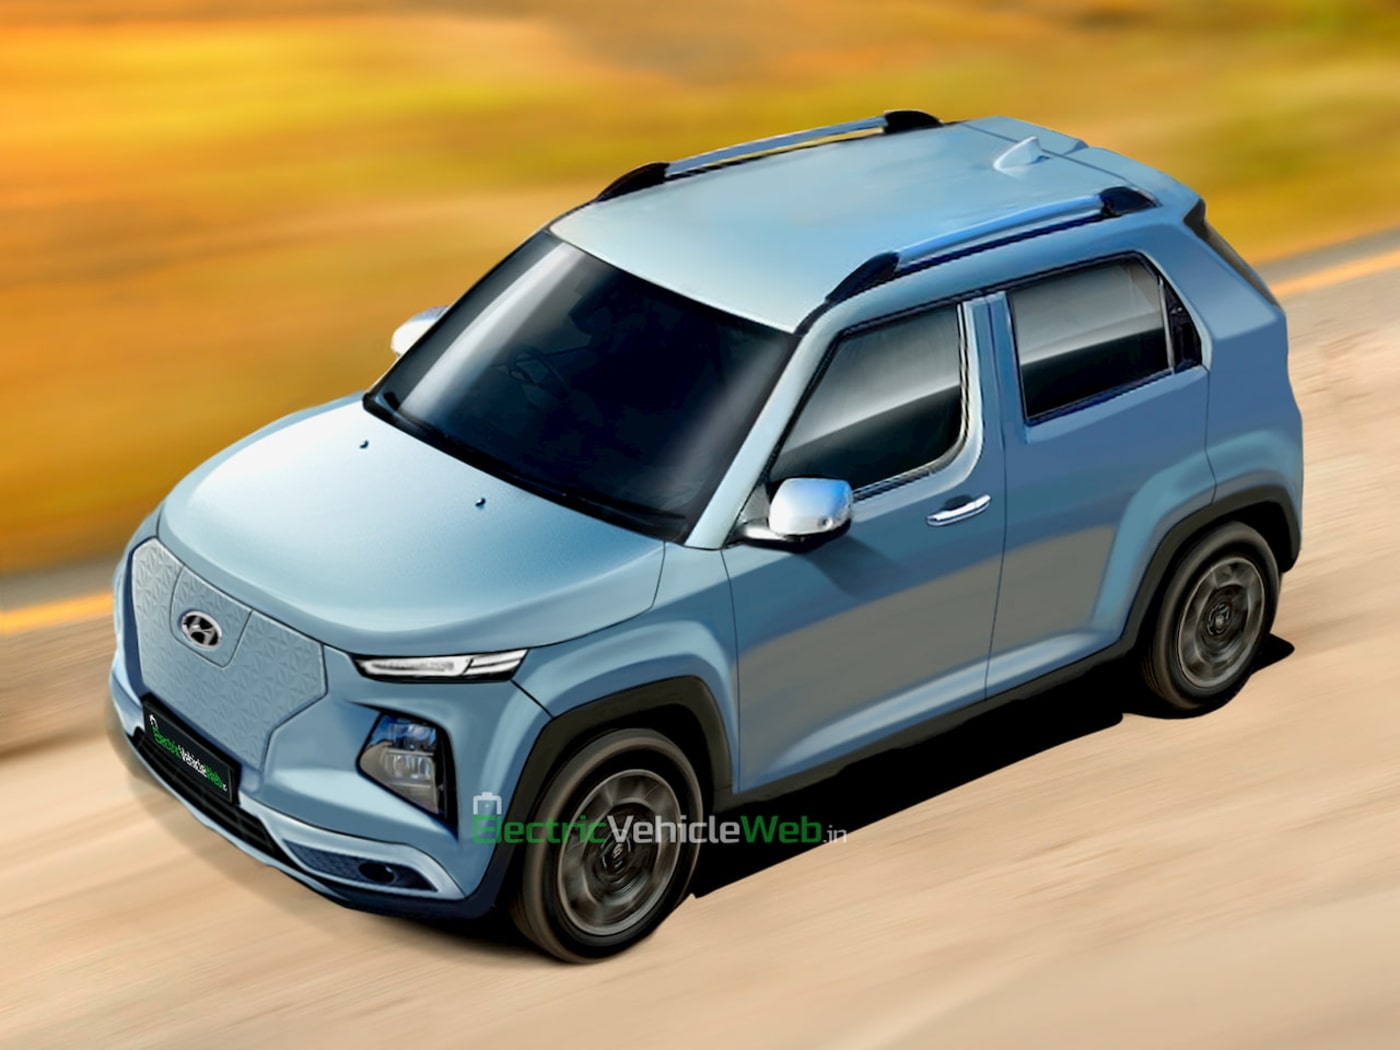 Hyundai’s Upcoming Entry-Level EV Rendered Based On AX Micro SUV